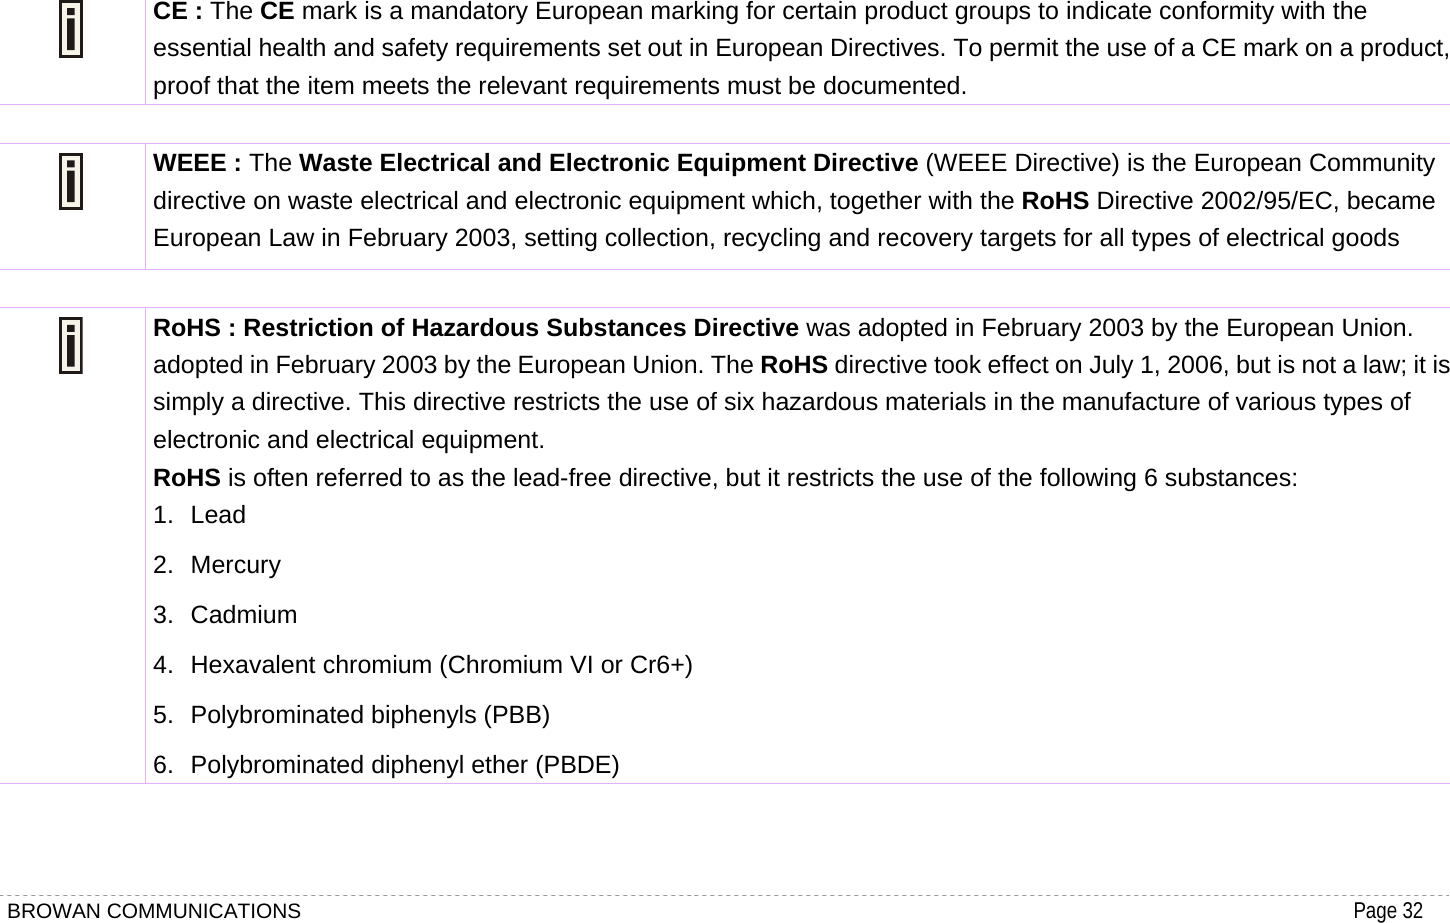 BROWAN COMMUNICATIONS                                                                                           Page 32   CE : The CE mark is a mandatory European marking for certain product groups to indicate conformity with the essential health and safety requirements set out in European Directives. To permit the use of a CE mark on a product, proof that the item meets the relevant requirements must be documented.   WEEE : The Waste Electrical and Electronic Equipment Directive (WEEE Directive) is the European Community directive on waste electrical and electronic equipment which, together with the RoHS Directive 2002/95/EC, became European Law in February 2003, setting collection, recycling and recovery targets for all types of electrical goods   RoHS : Restriction of Hazardous Substances Directive was adopted in February 2003 by the European Union. adopted in February 2003 by the European Union. The RoHS directive took effect on July 1, 2006, but is not a law; it is simply a directive. This directive restricts the use of six hazardous materials in the manufacture of various types of electronic and electrical equipment. RoHS is often referred to as the lead-free directive, but it restricts the use of the following 6 substances: 1. Lead  2. Mercury  3. Cadmium  4. Hexavalent chromium (Chromium VI or Cr6+)   5.  Polybrominated biphenyls (PBB)   6. Polybrominated diphenyl ether (PBDE)  